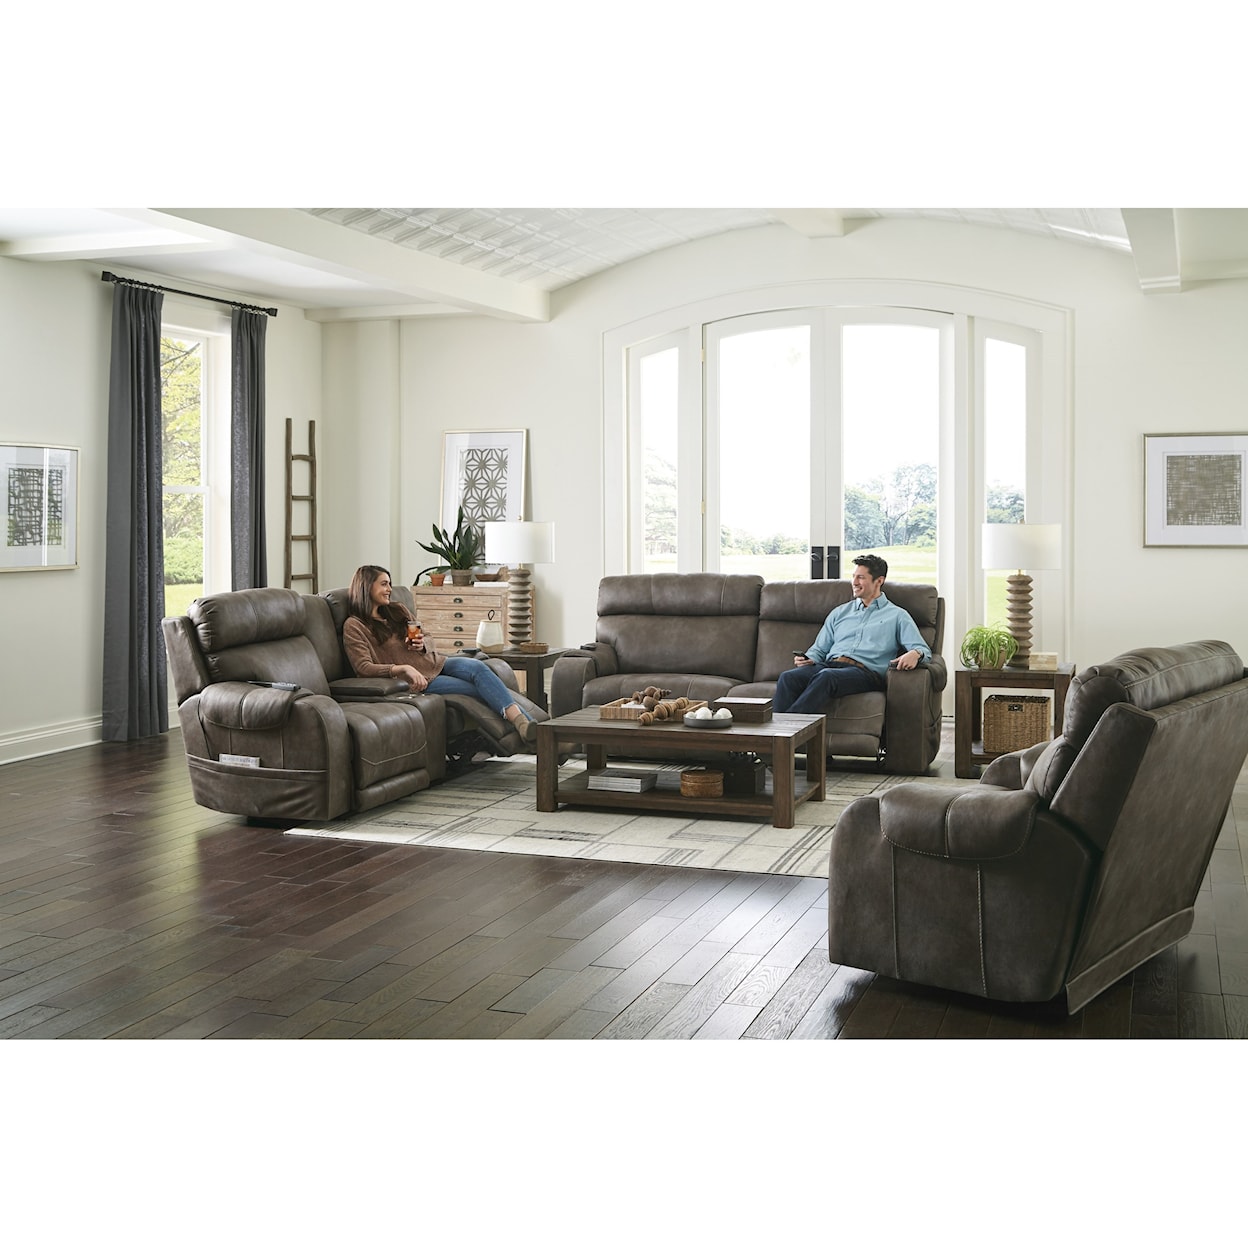 Catnapper 302 Serenity Pwr Hdrst Pwr Lay Flat Wall Hugger Recliner